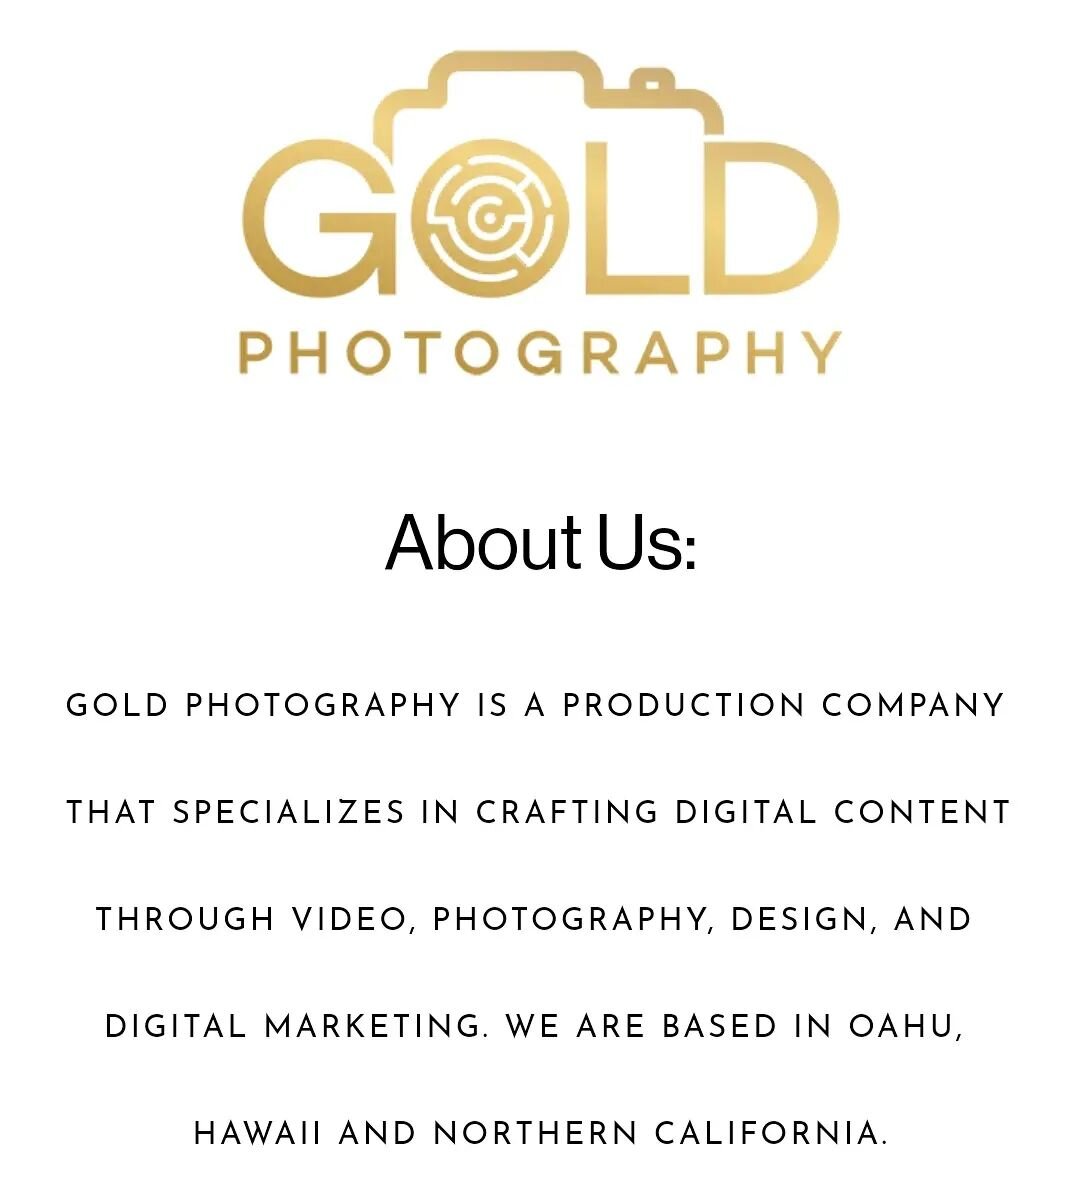 Plan your next shoot with us. Check our link in bio for more details.

#GoldPhotography #Photography #Videography #Photo #Photos #Video #Videos #BMPCC #Oahu #Hawaii #PhotoOfTheDay #Love #Instagood #Instagram #Like #PicOfTheDay #Follow #Nature #Beauty